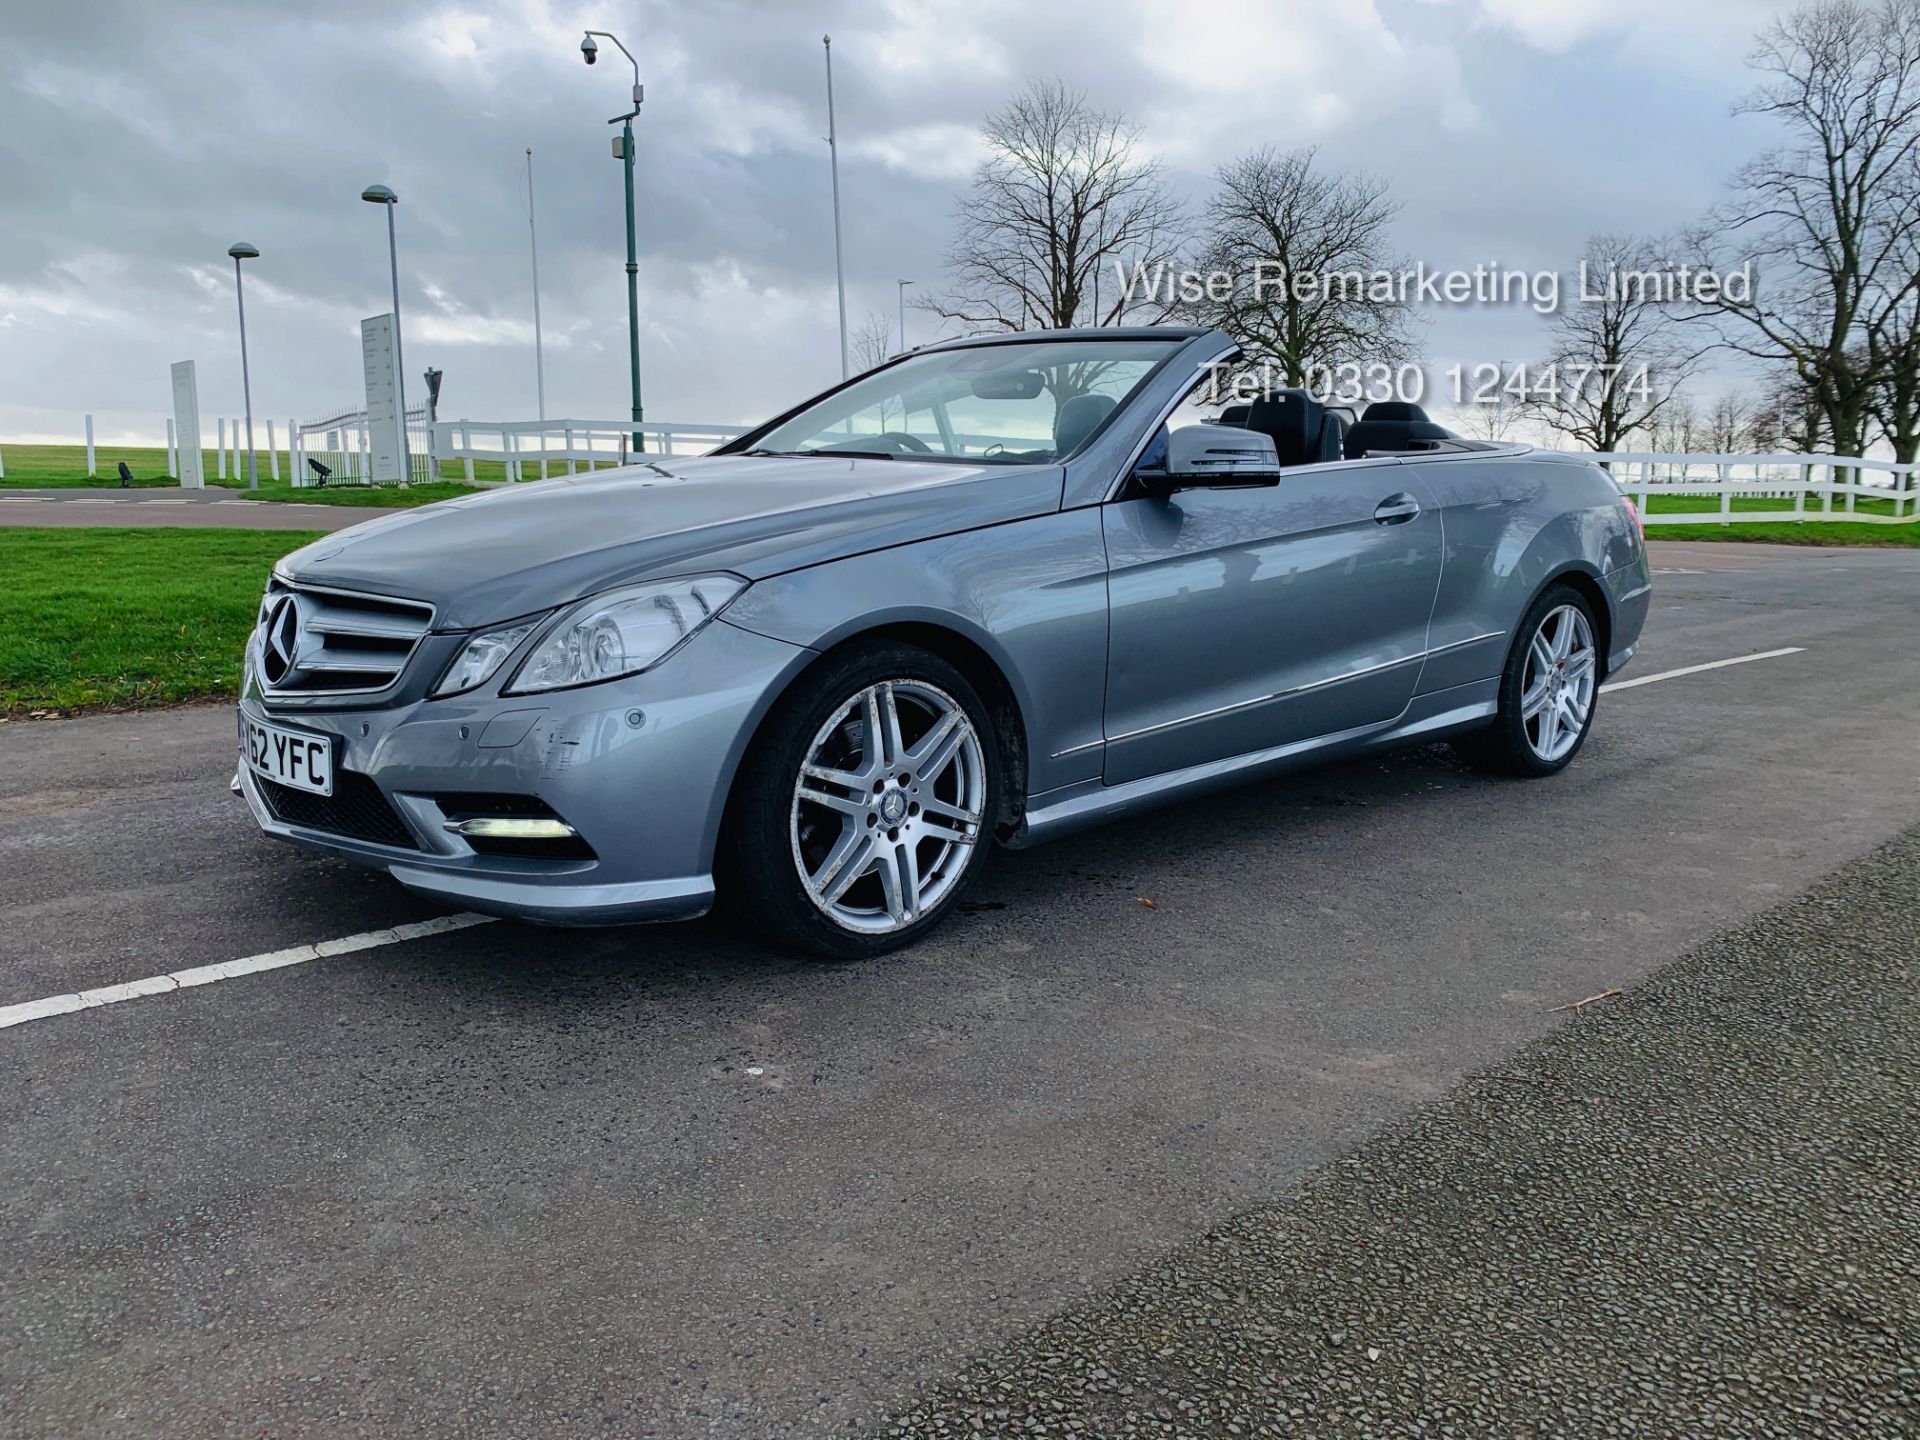 Mercedes E250 CDI Convertible Sport Tip Auto - 2013 Model - Service History - Leather - Parking aid - Image 10 of 27